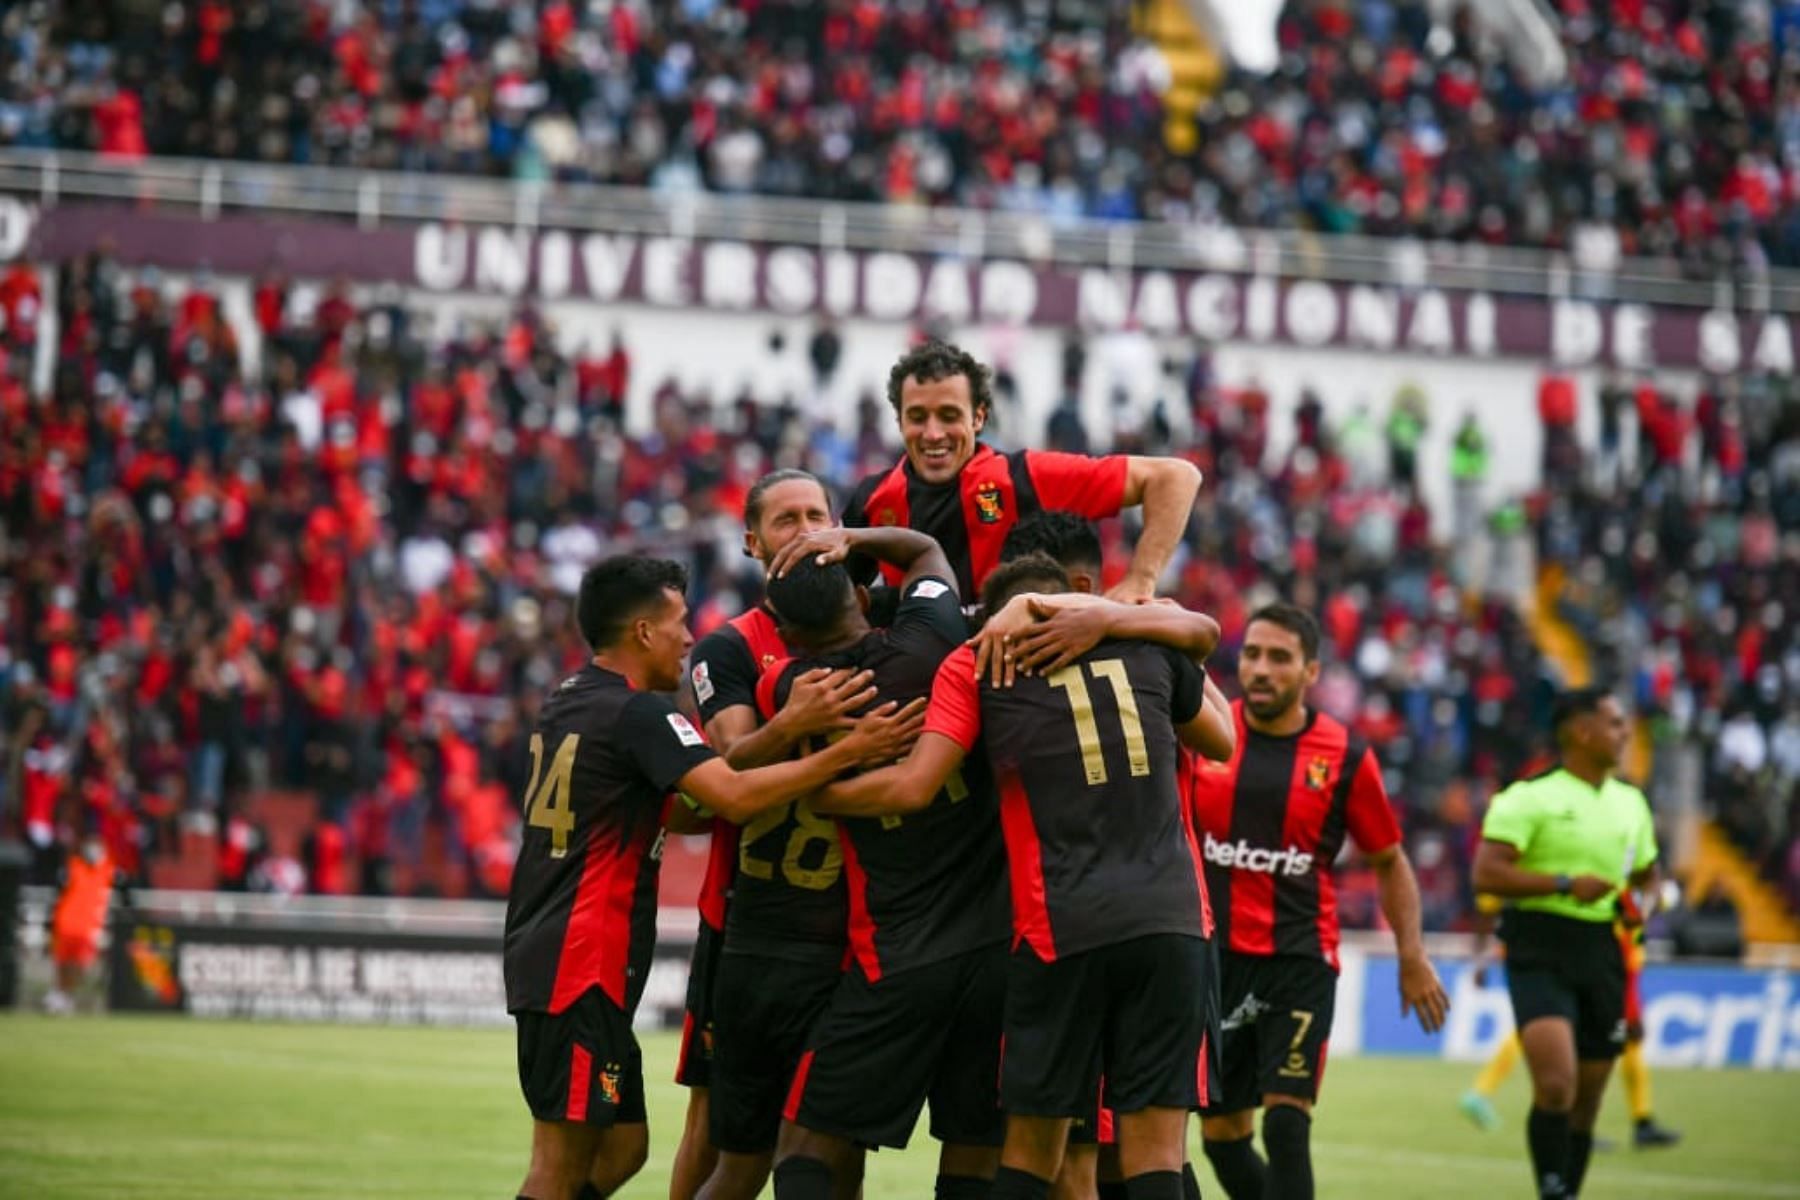 Melgar are close to reaching the last-16